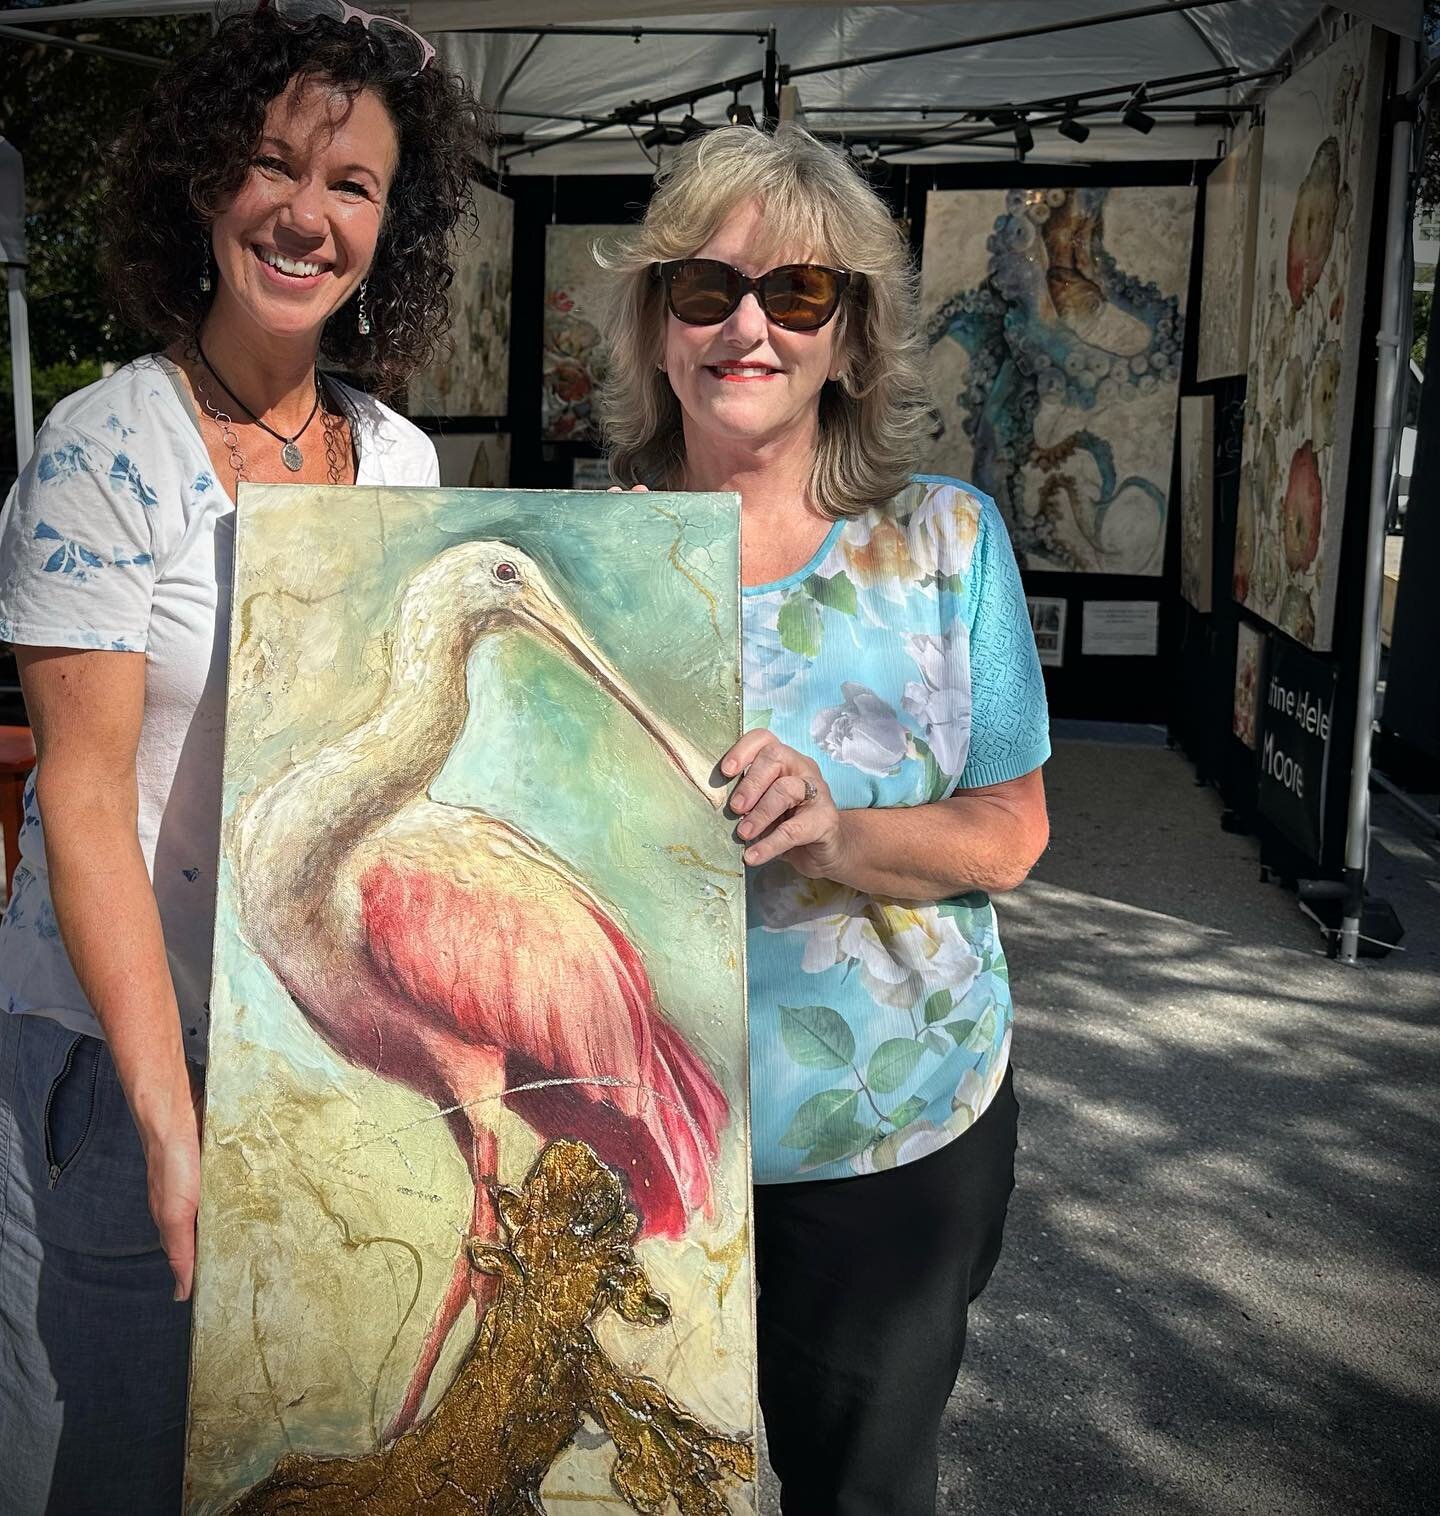 Thank you, Cathy and Rich! You made a special trip out to Naples to find my booth and made my day. Our conversation was so sweet and appreciated. Very happy to have you take home Spoonbill II and I hope to see you again at future shows!
#naplesart